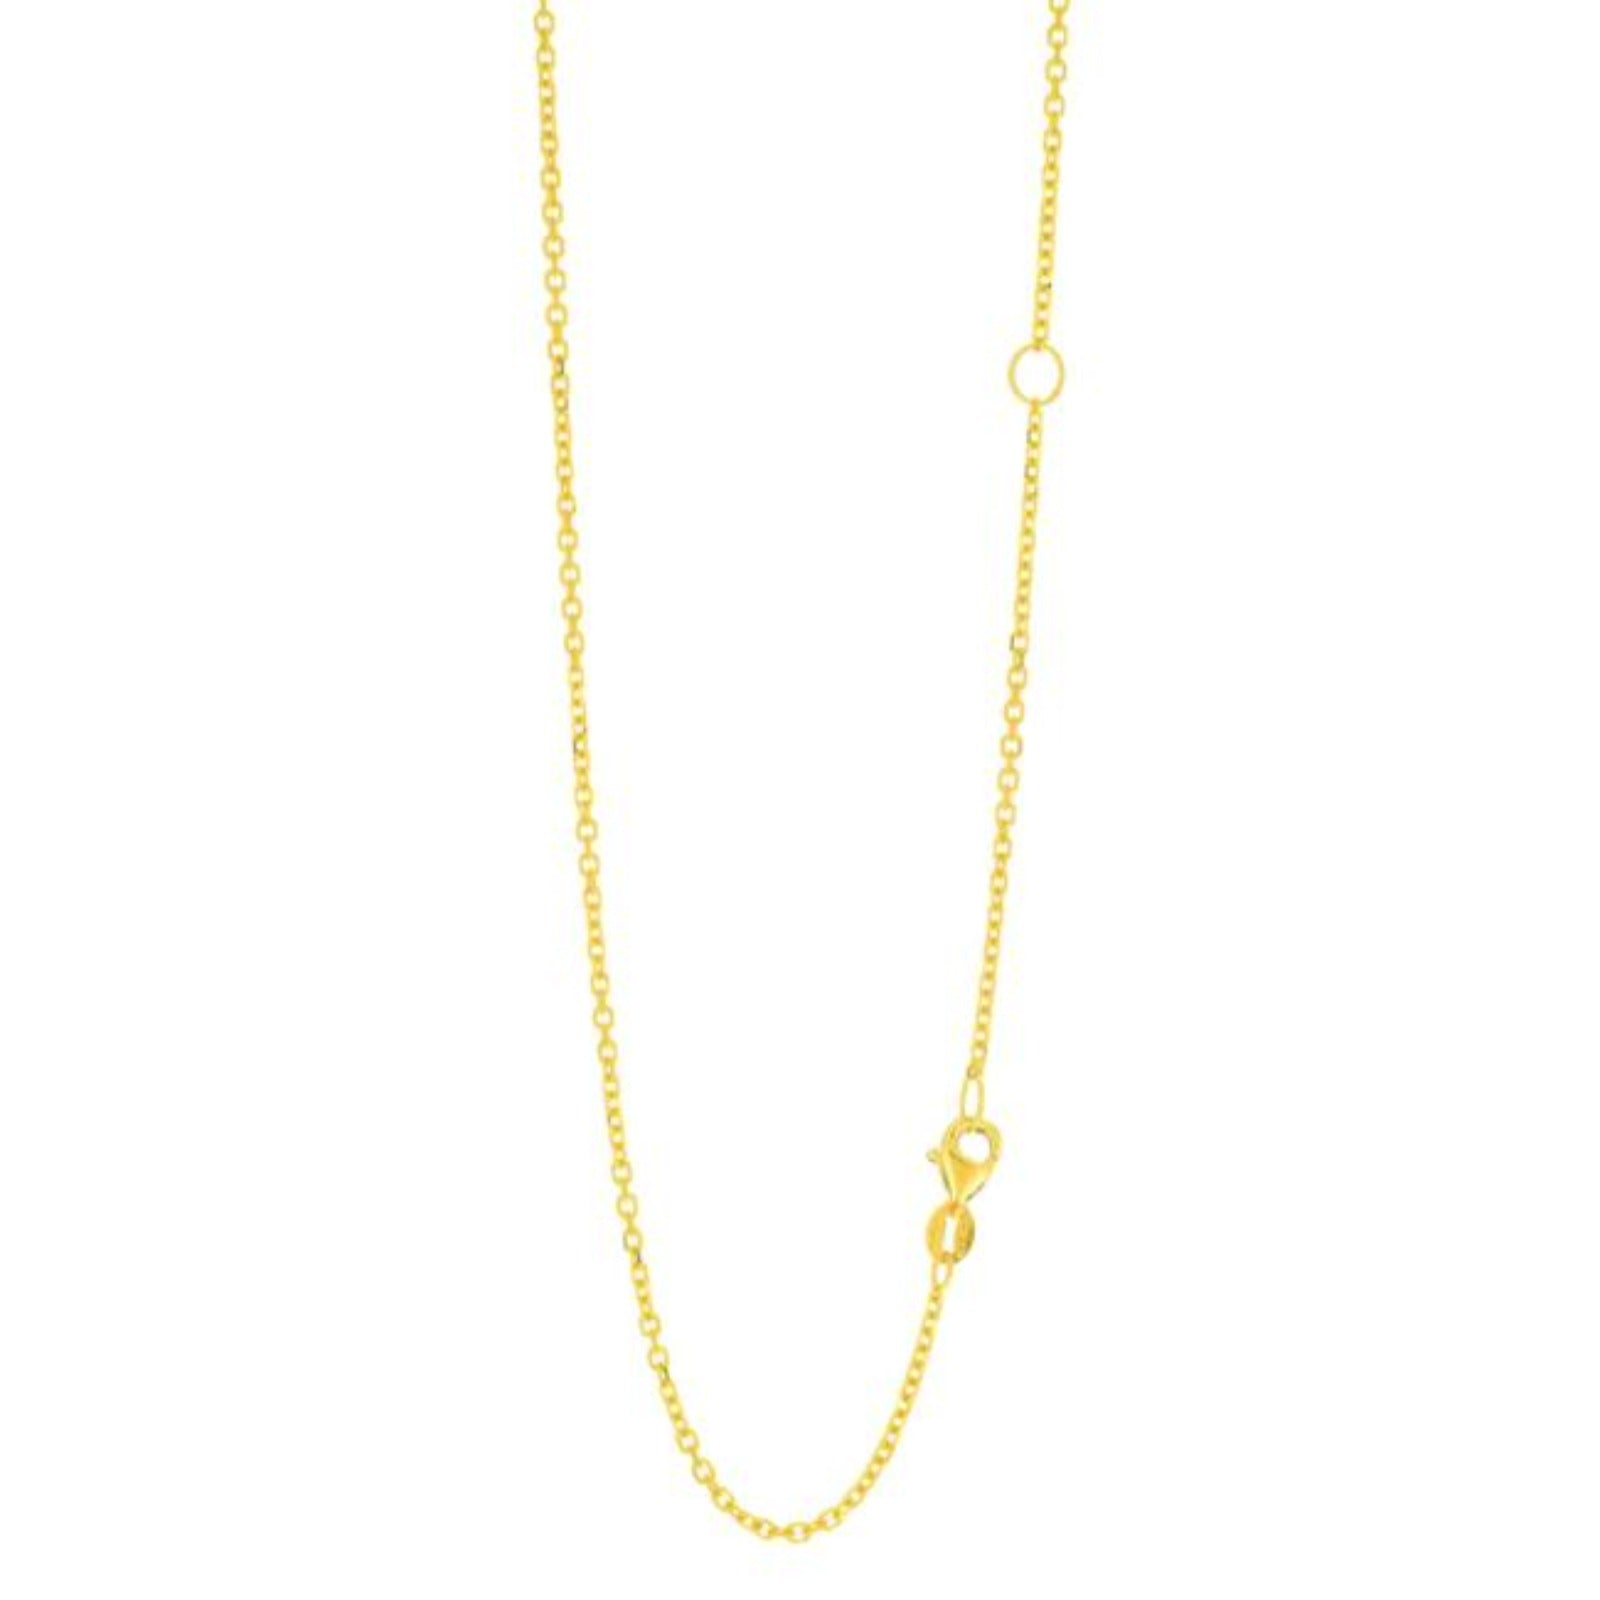 14k gold Diamond Cut Cable Chain Necklace with a lobster clasp